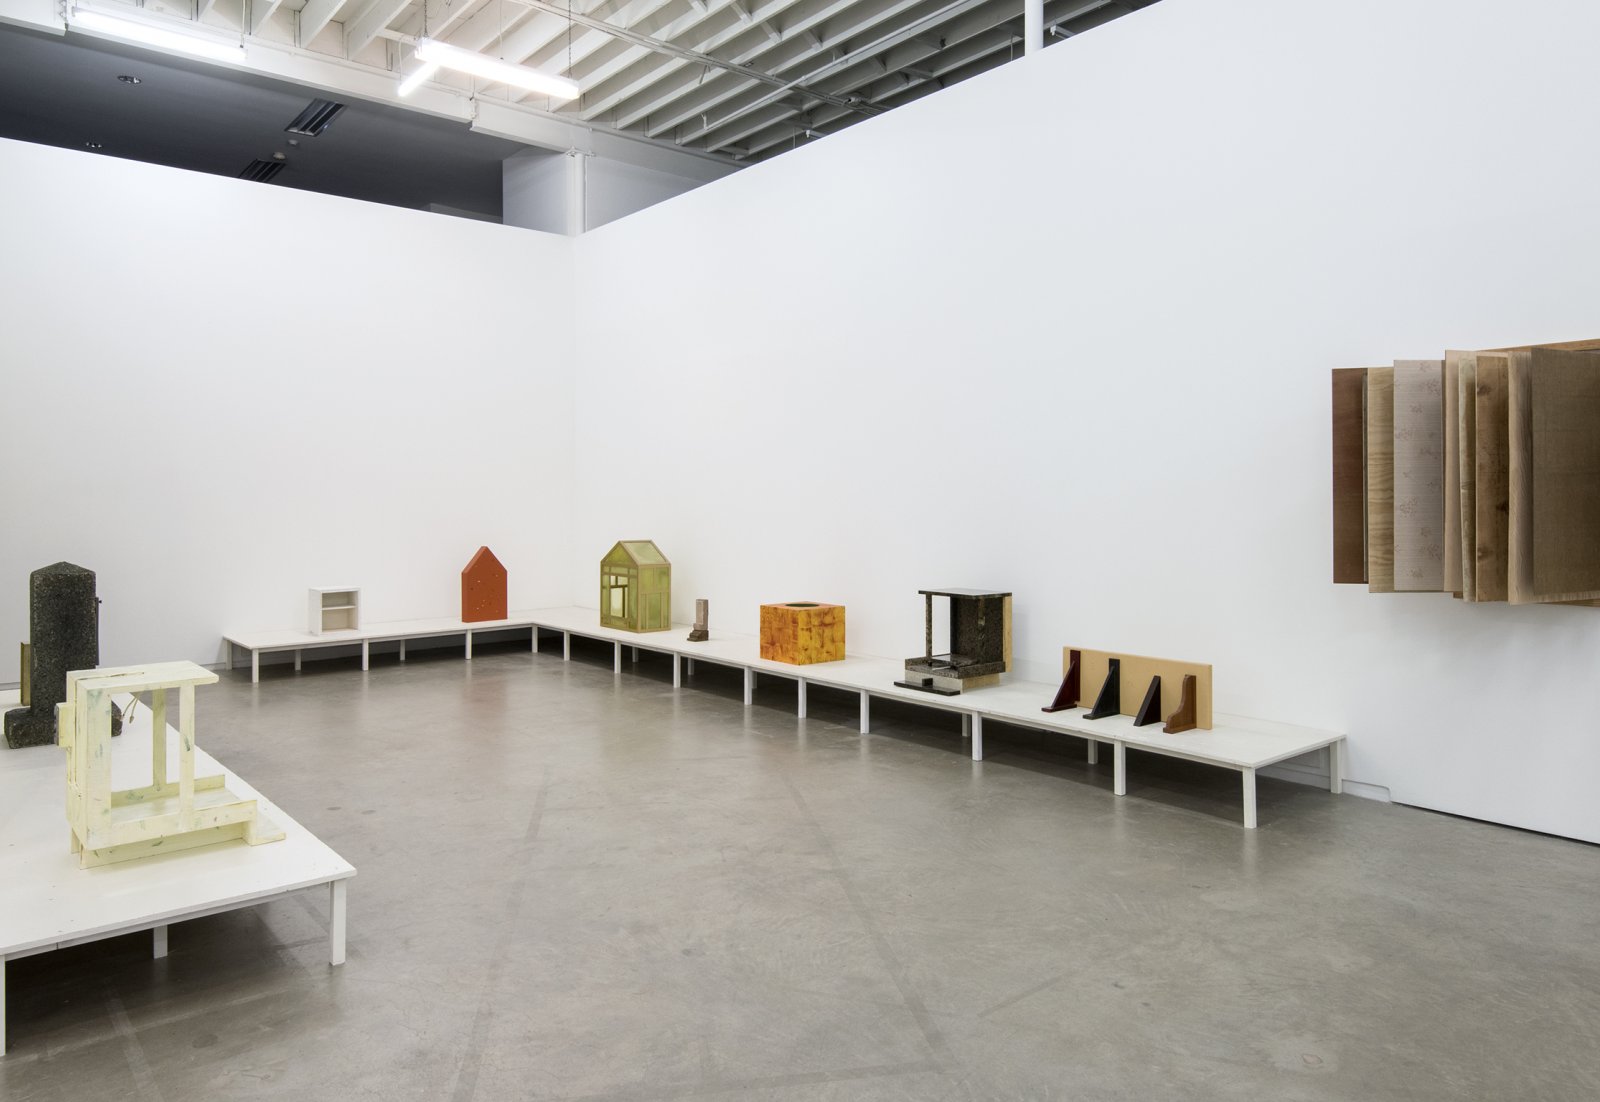 Gareth Moore, installation view, Household Temple Yard, Catriona Jeffries, 2013 ​​ by Ashes Withyman